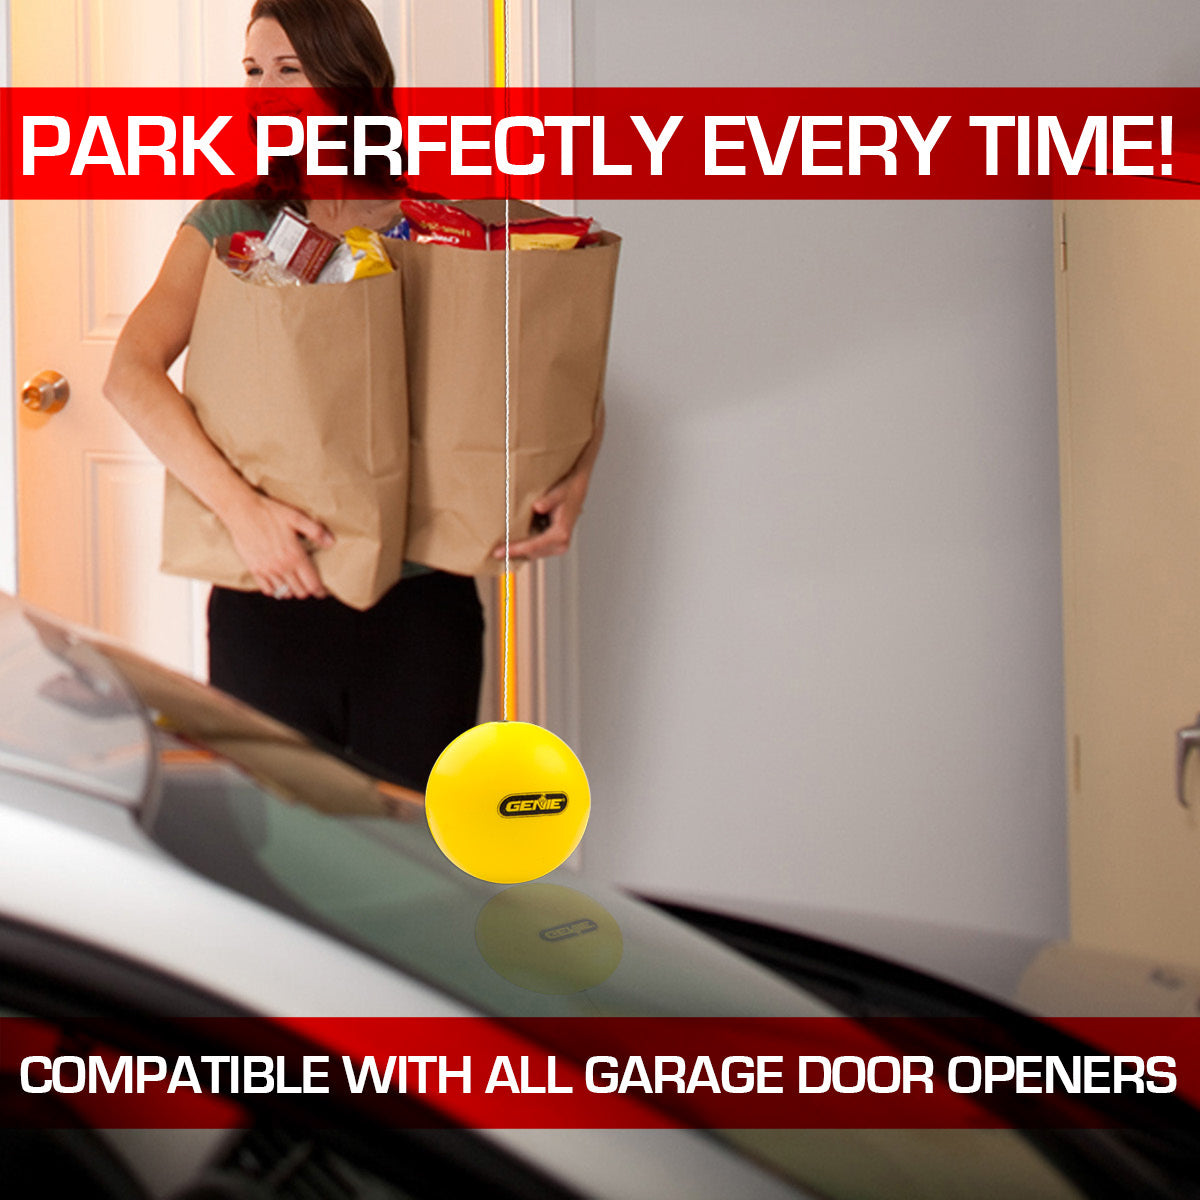 Perfect Stop Garage Parking Aid - park perfectly every time 